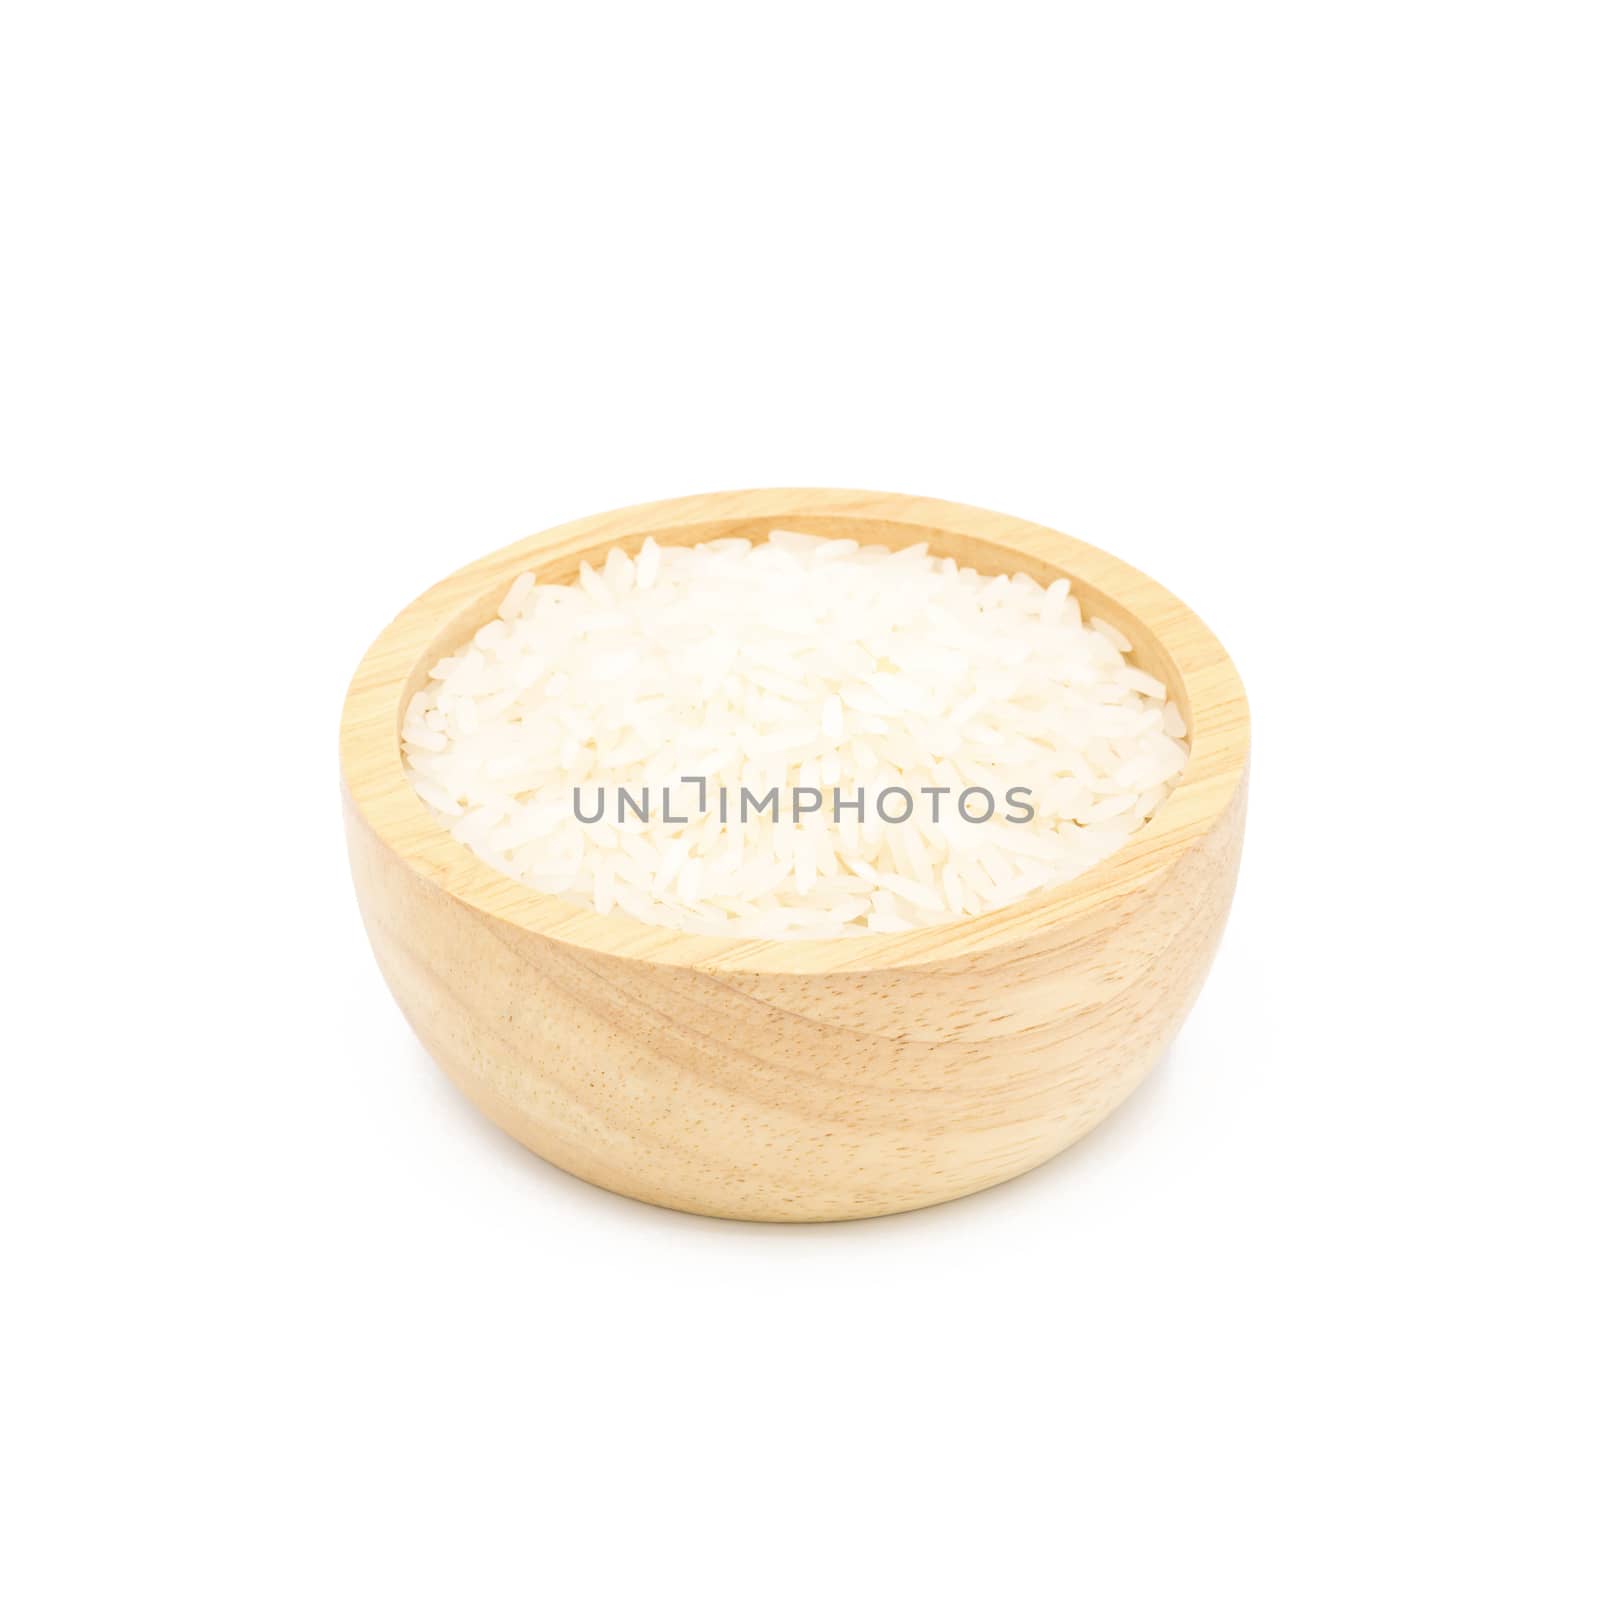 Rice in a wooden cup isolated on white background.